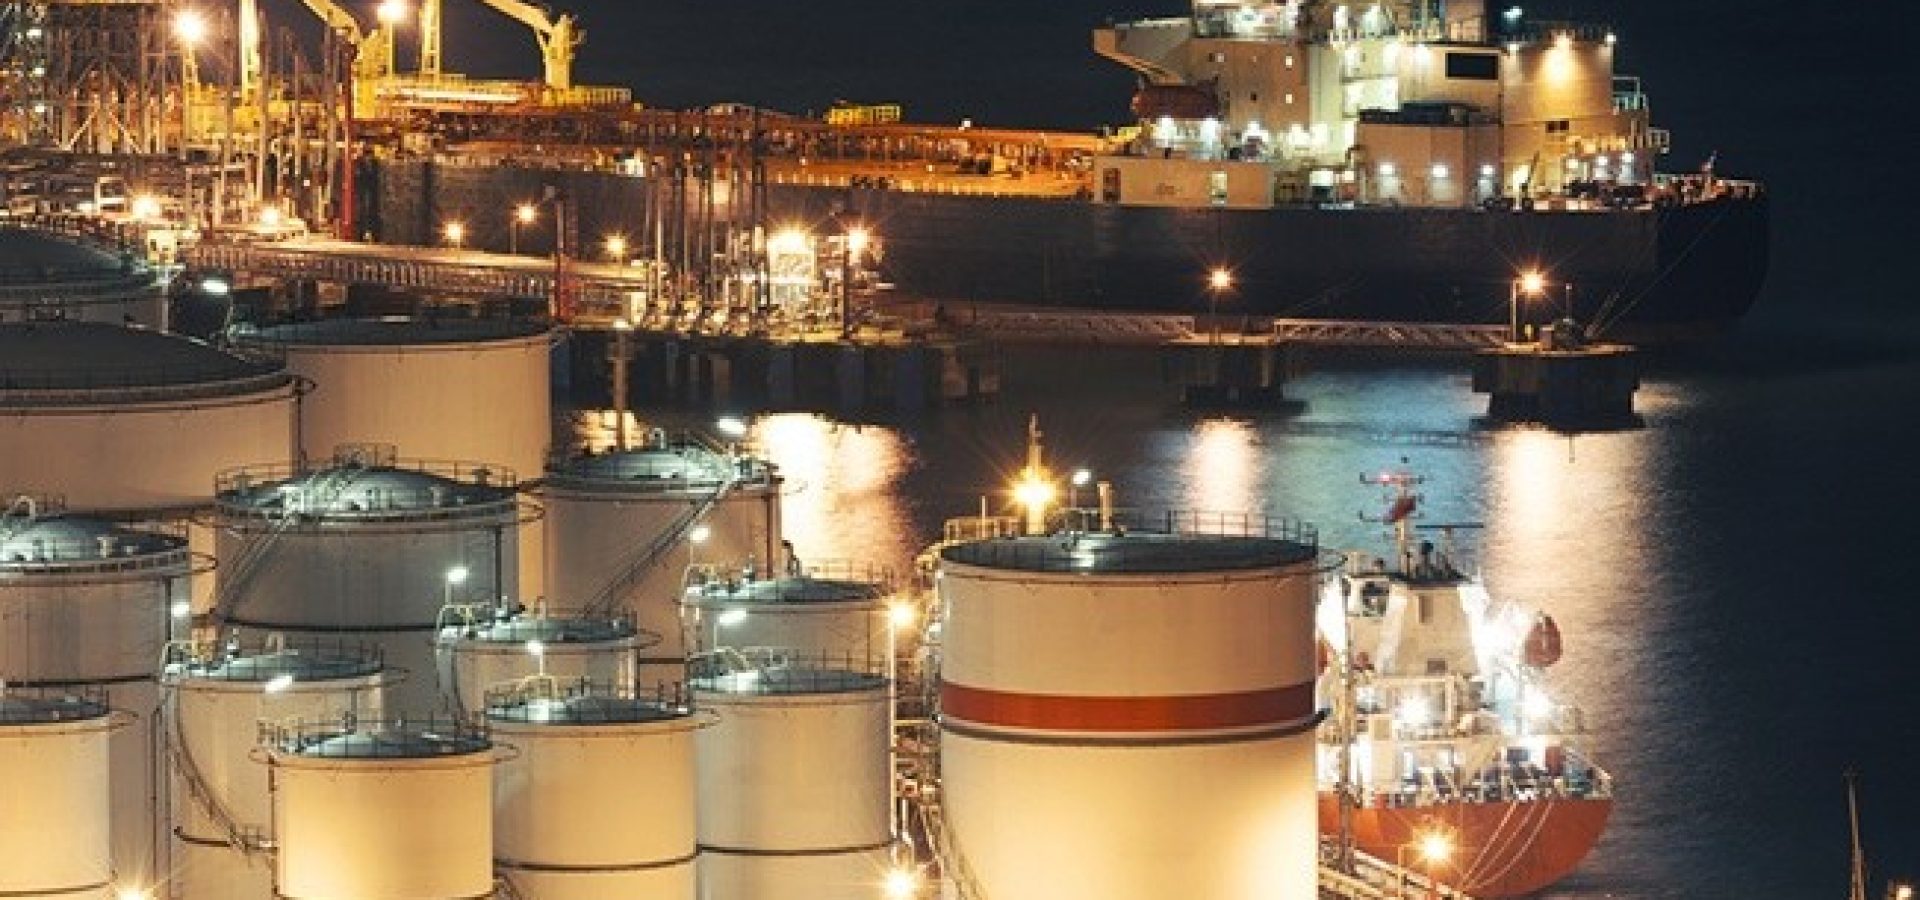 Wibest – Oil: An aerial shot of oil inventories and a ship behind on nighttime.